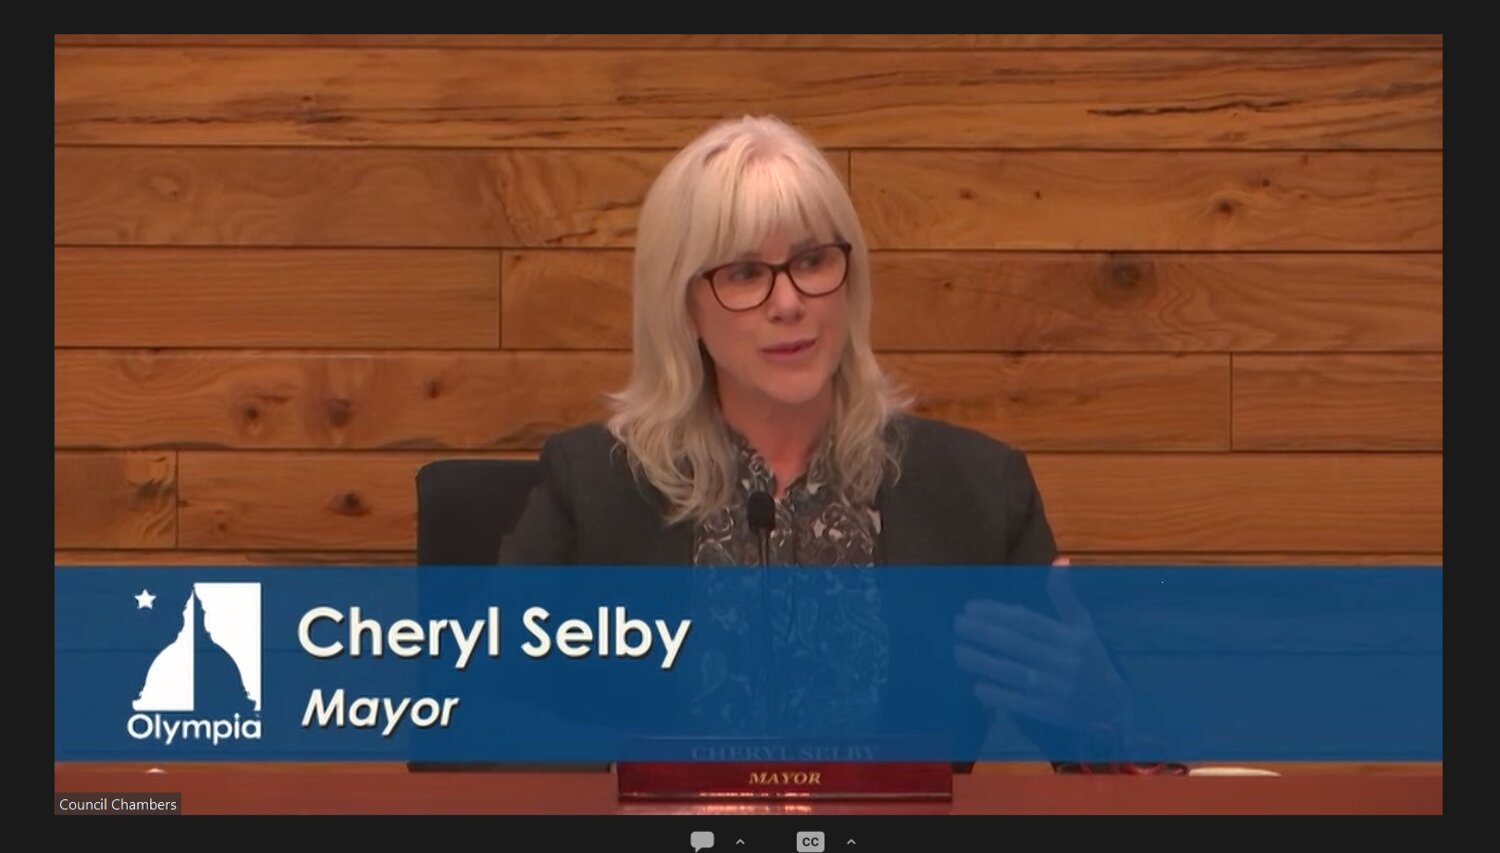 Mayor Cheryl Selby expressed concern about the risk of losing the state’s tax incentives if Olympia did not proceed with the SE UGA annexation process.